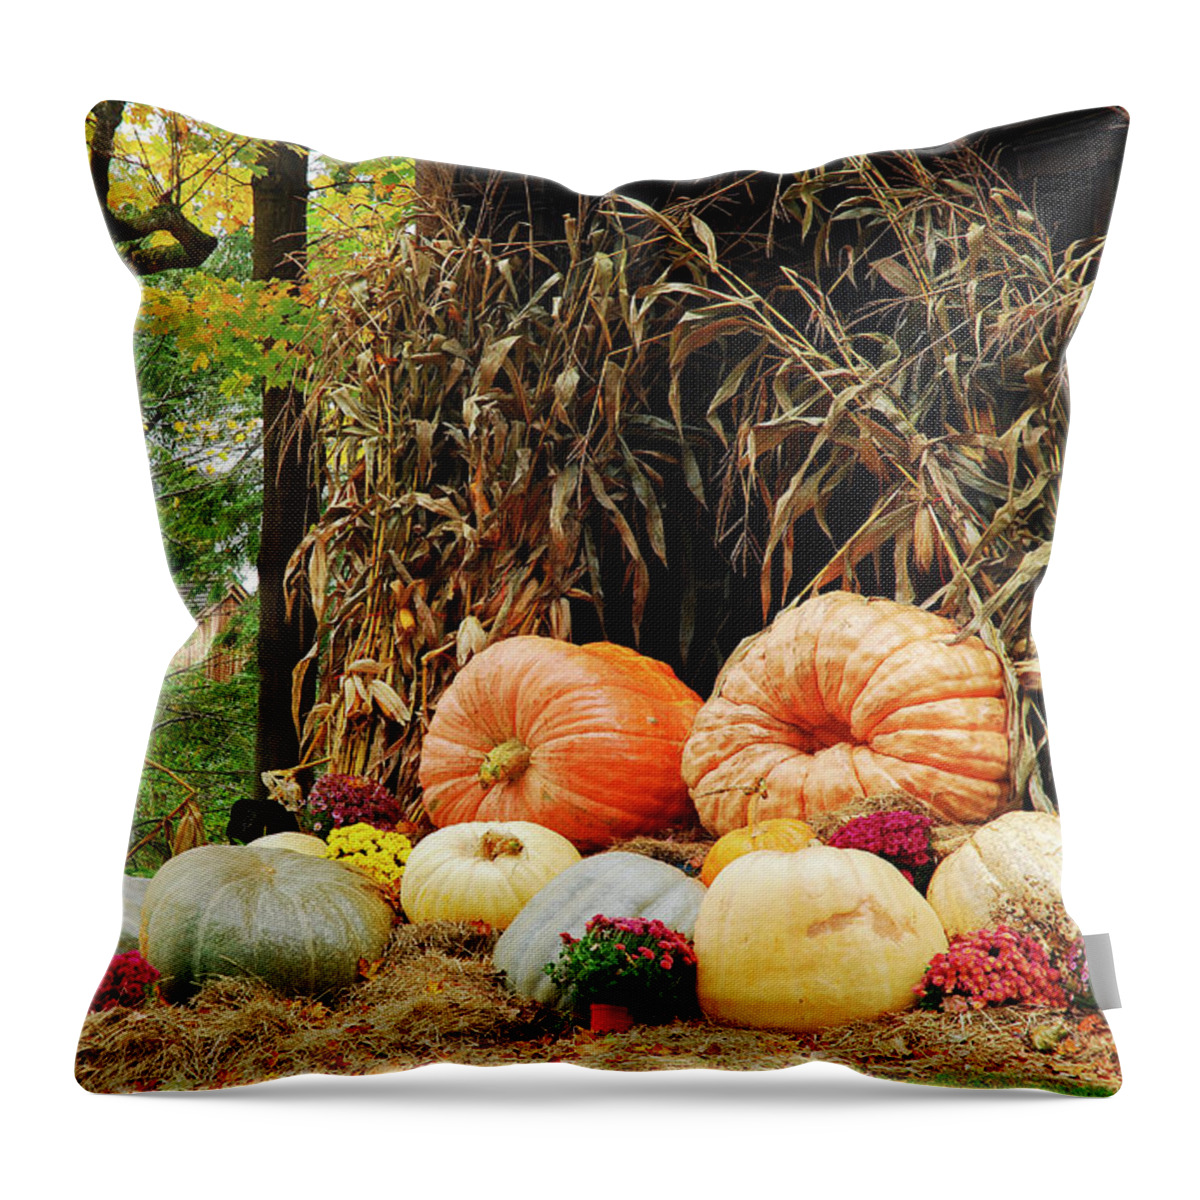 Vermont Throw Pillow featuring the photograph Autumn Bounty by James Kirkikis